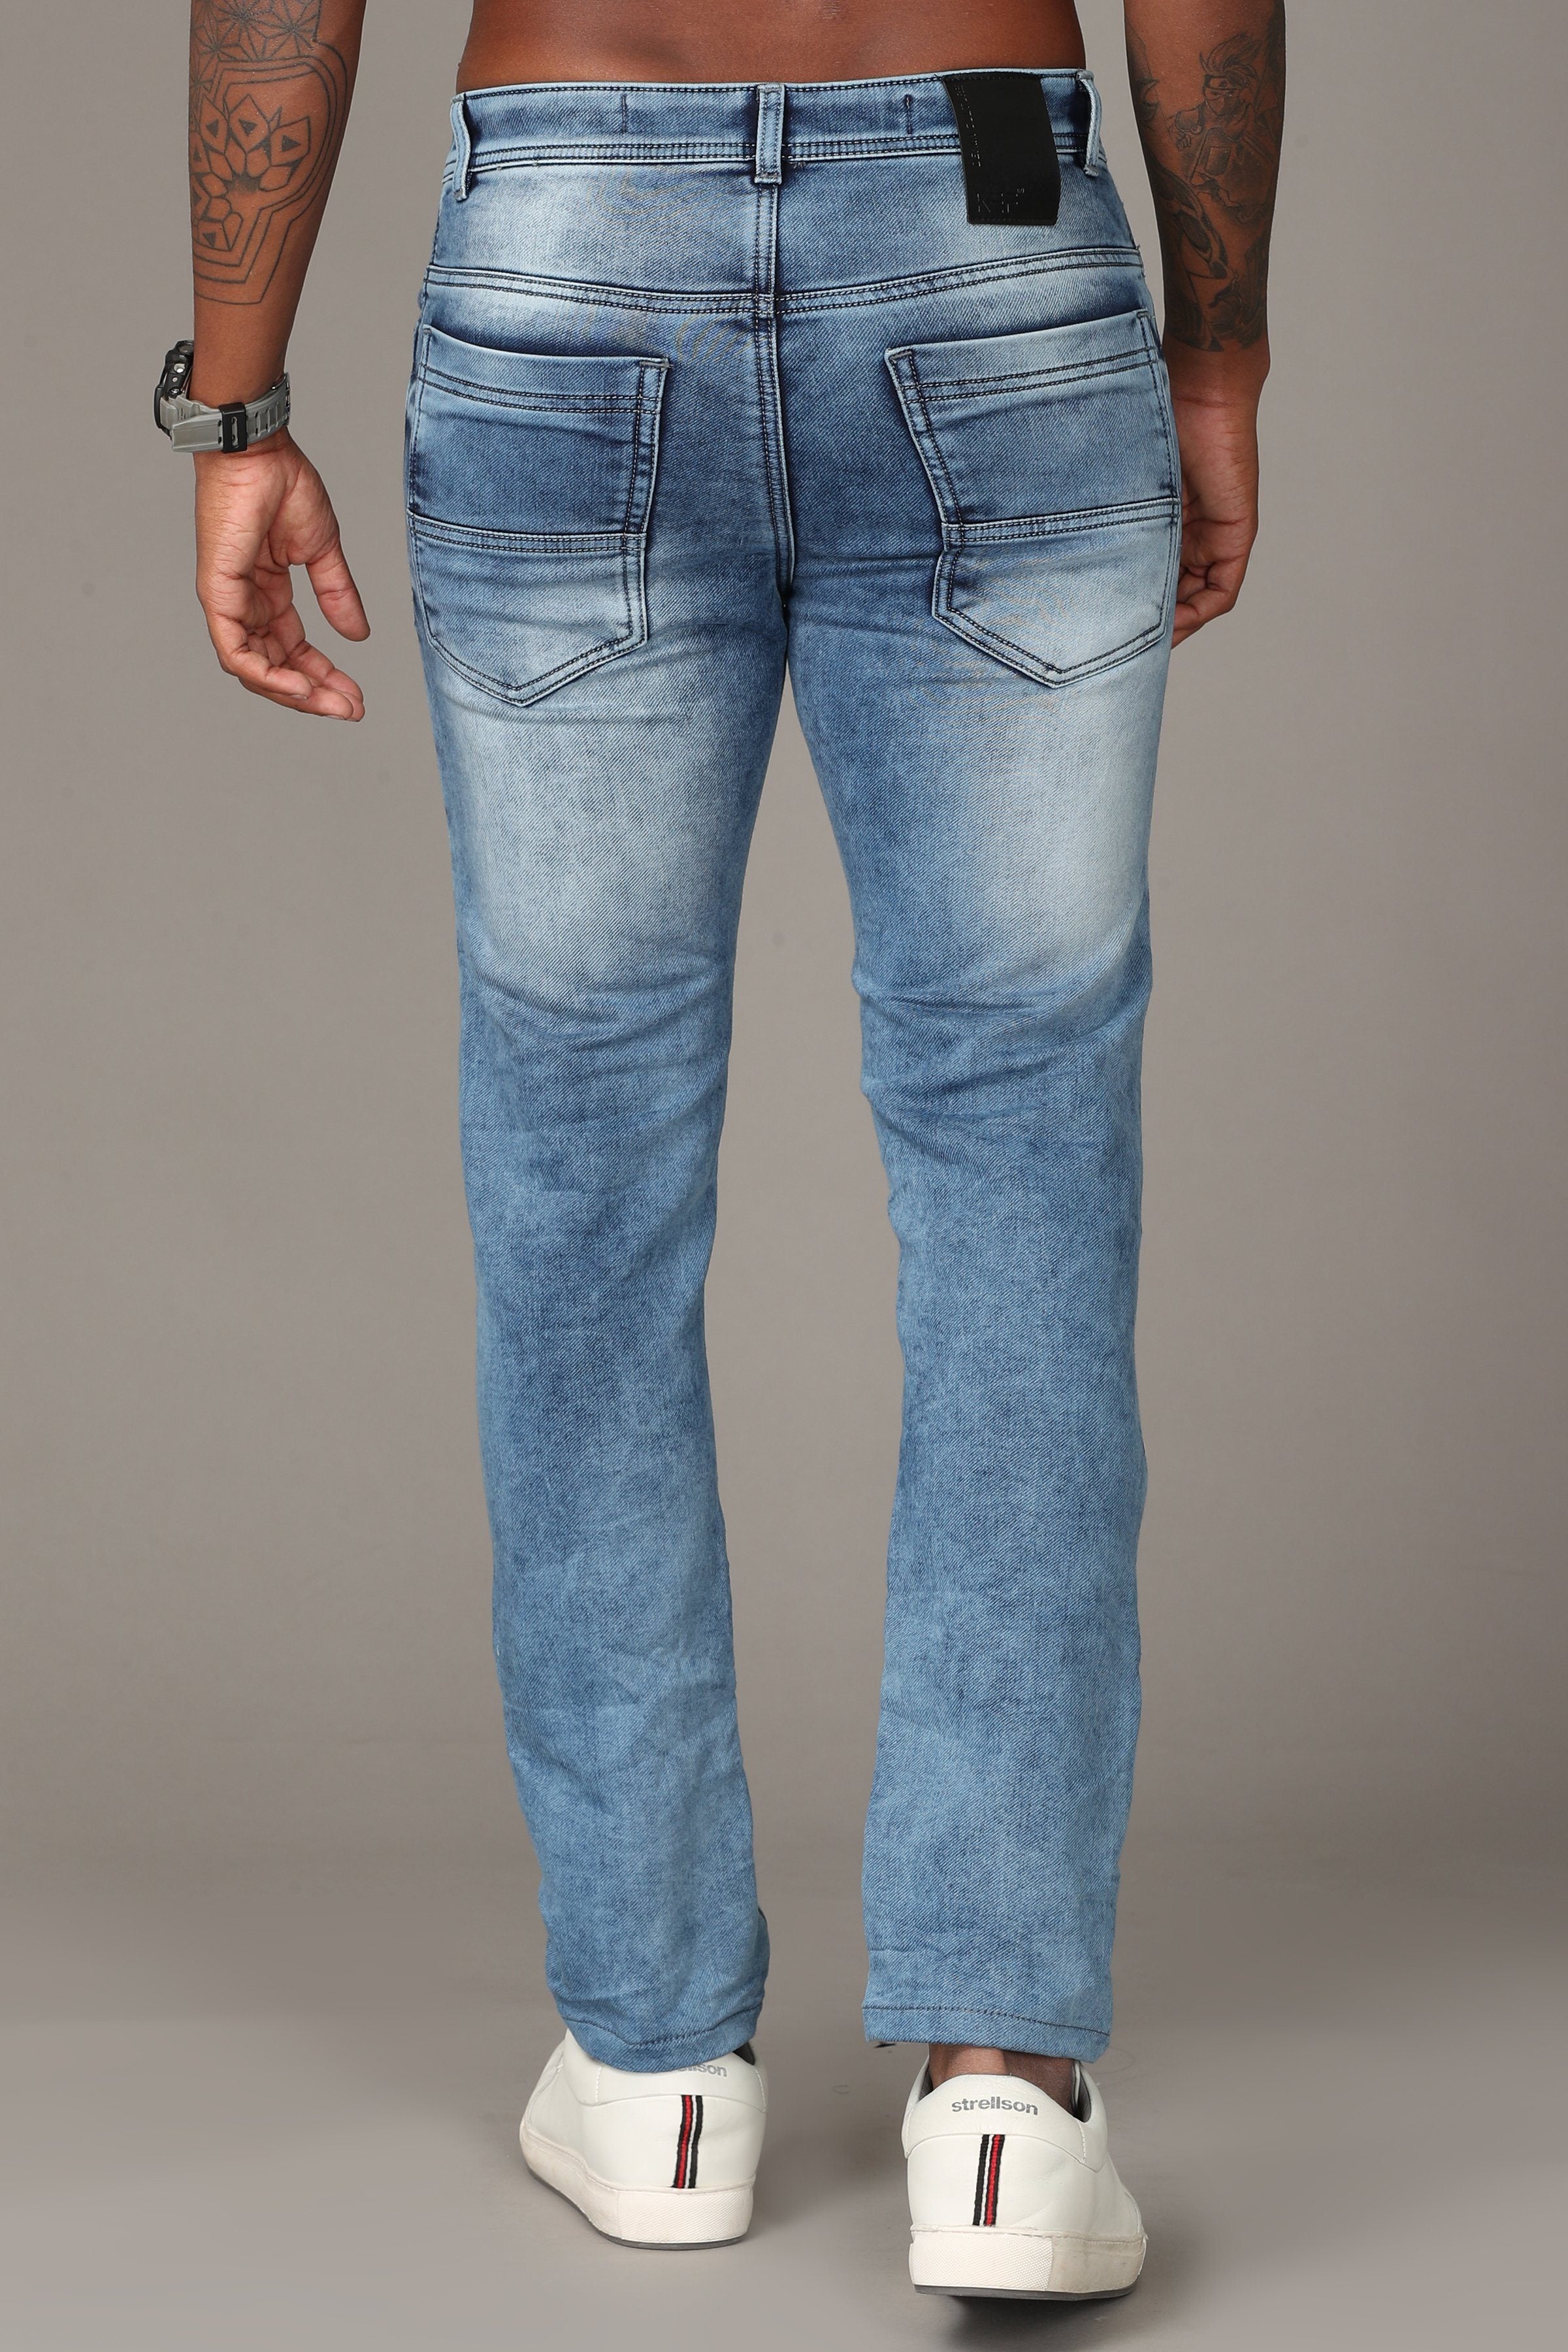 Blue with Light Fade Jeans Jeans KEF 